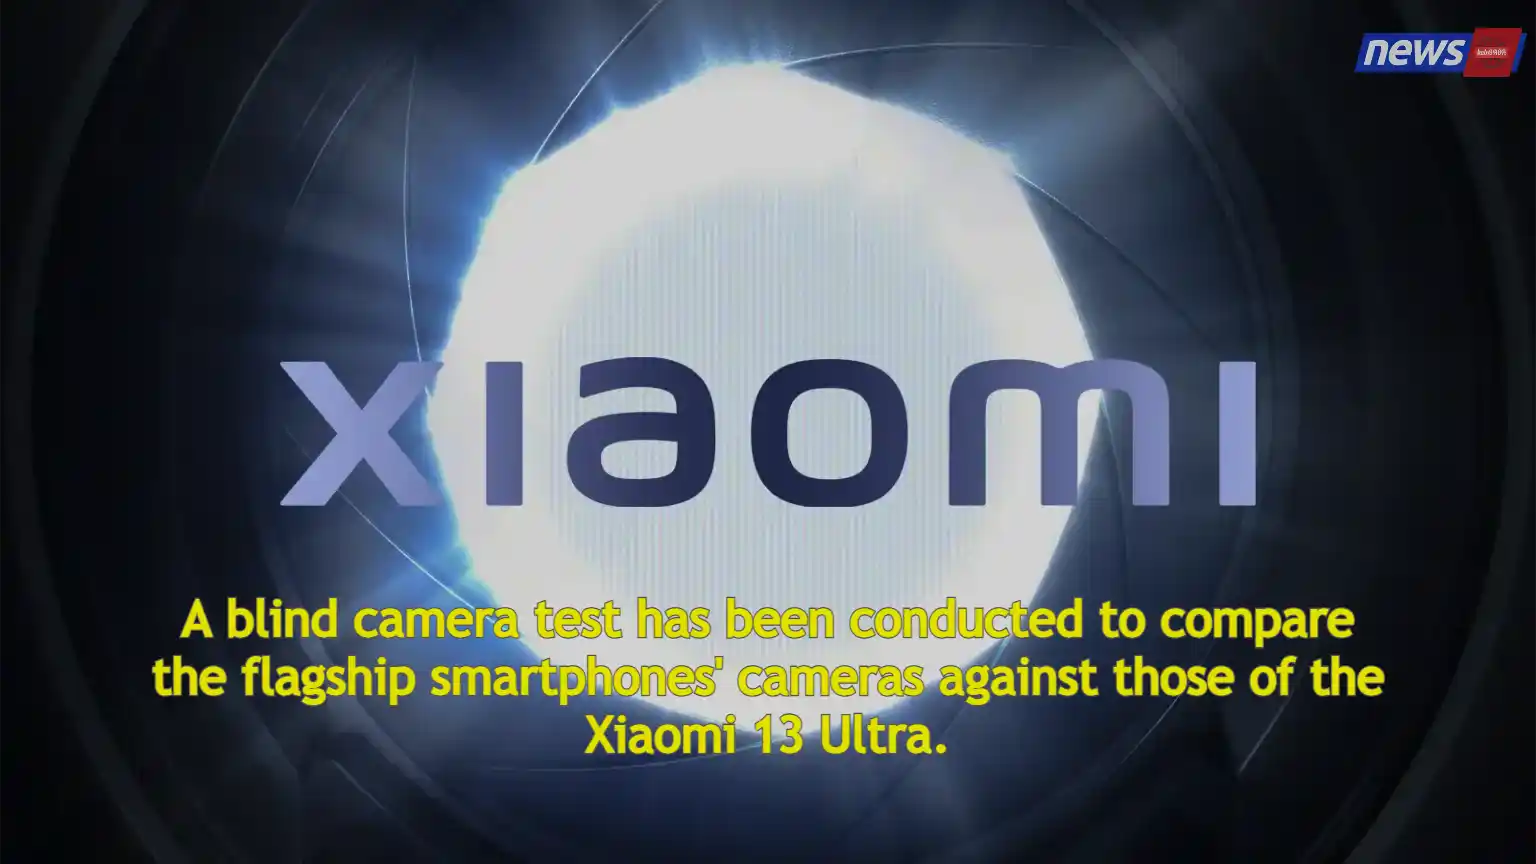 A blind camera test has been conducted to compare the flagship smartphones' cameras against those of the Xiaomi 13 Ultra.